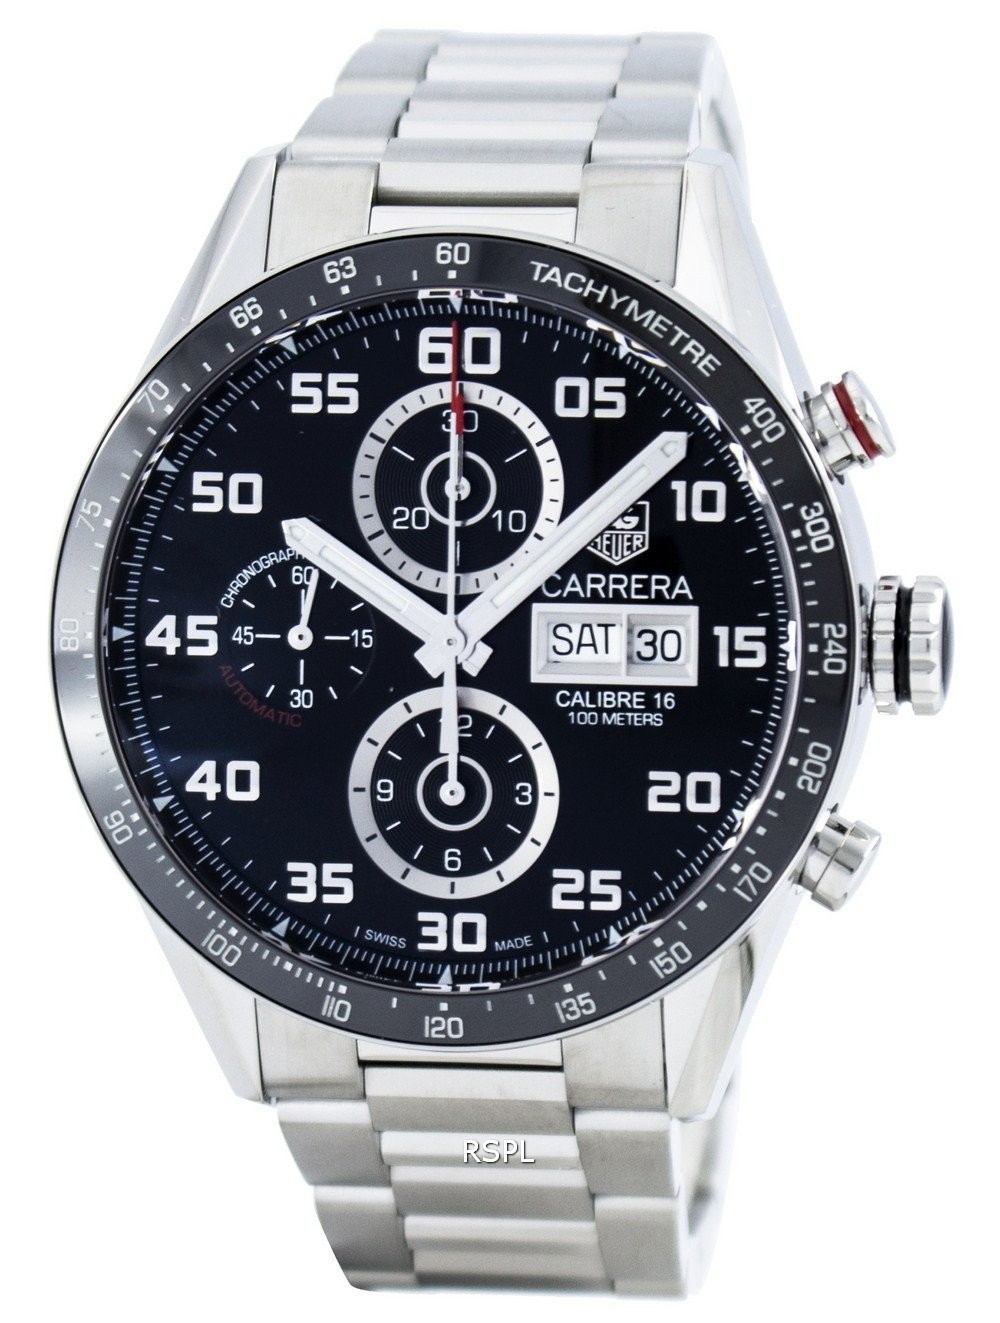 Tag Heuer Carrera Chronograph Automatic Calibre 16 Swiss Made CV2A1R.BA0799 Men’s Watch.jpg  by citywatchesnz